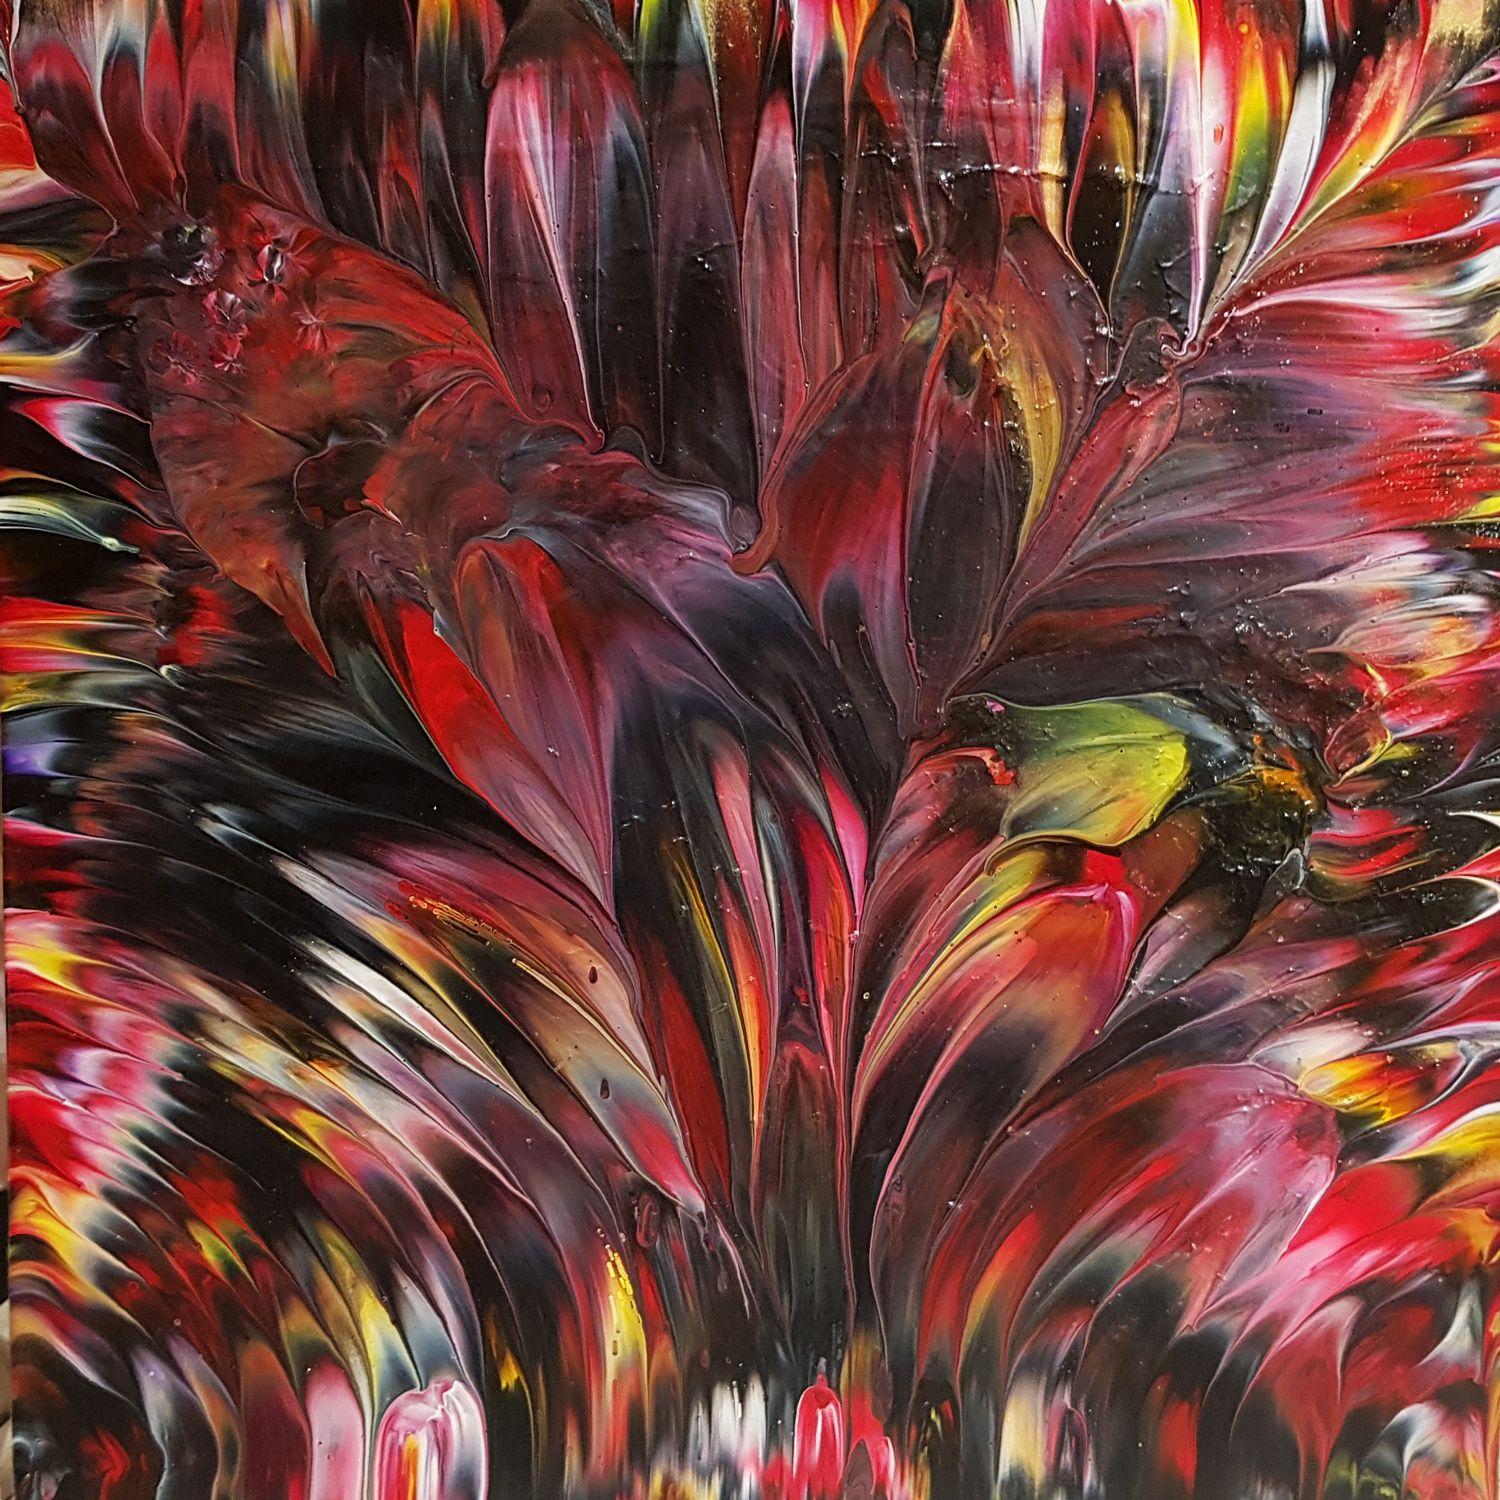 Phoenix Feathers is an expressive painting with blazing red and yellow to represent the fight of the flames and how pain may sear, but the yellow also represents hope and optimism, illustrating that we wouldn't know what joy was unless we had